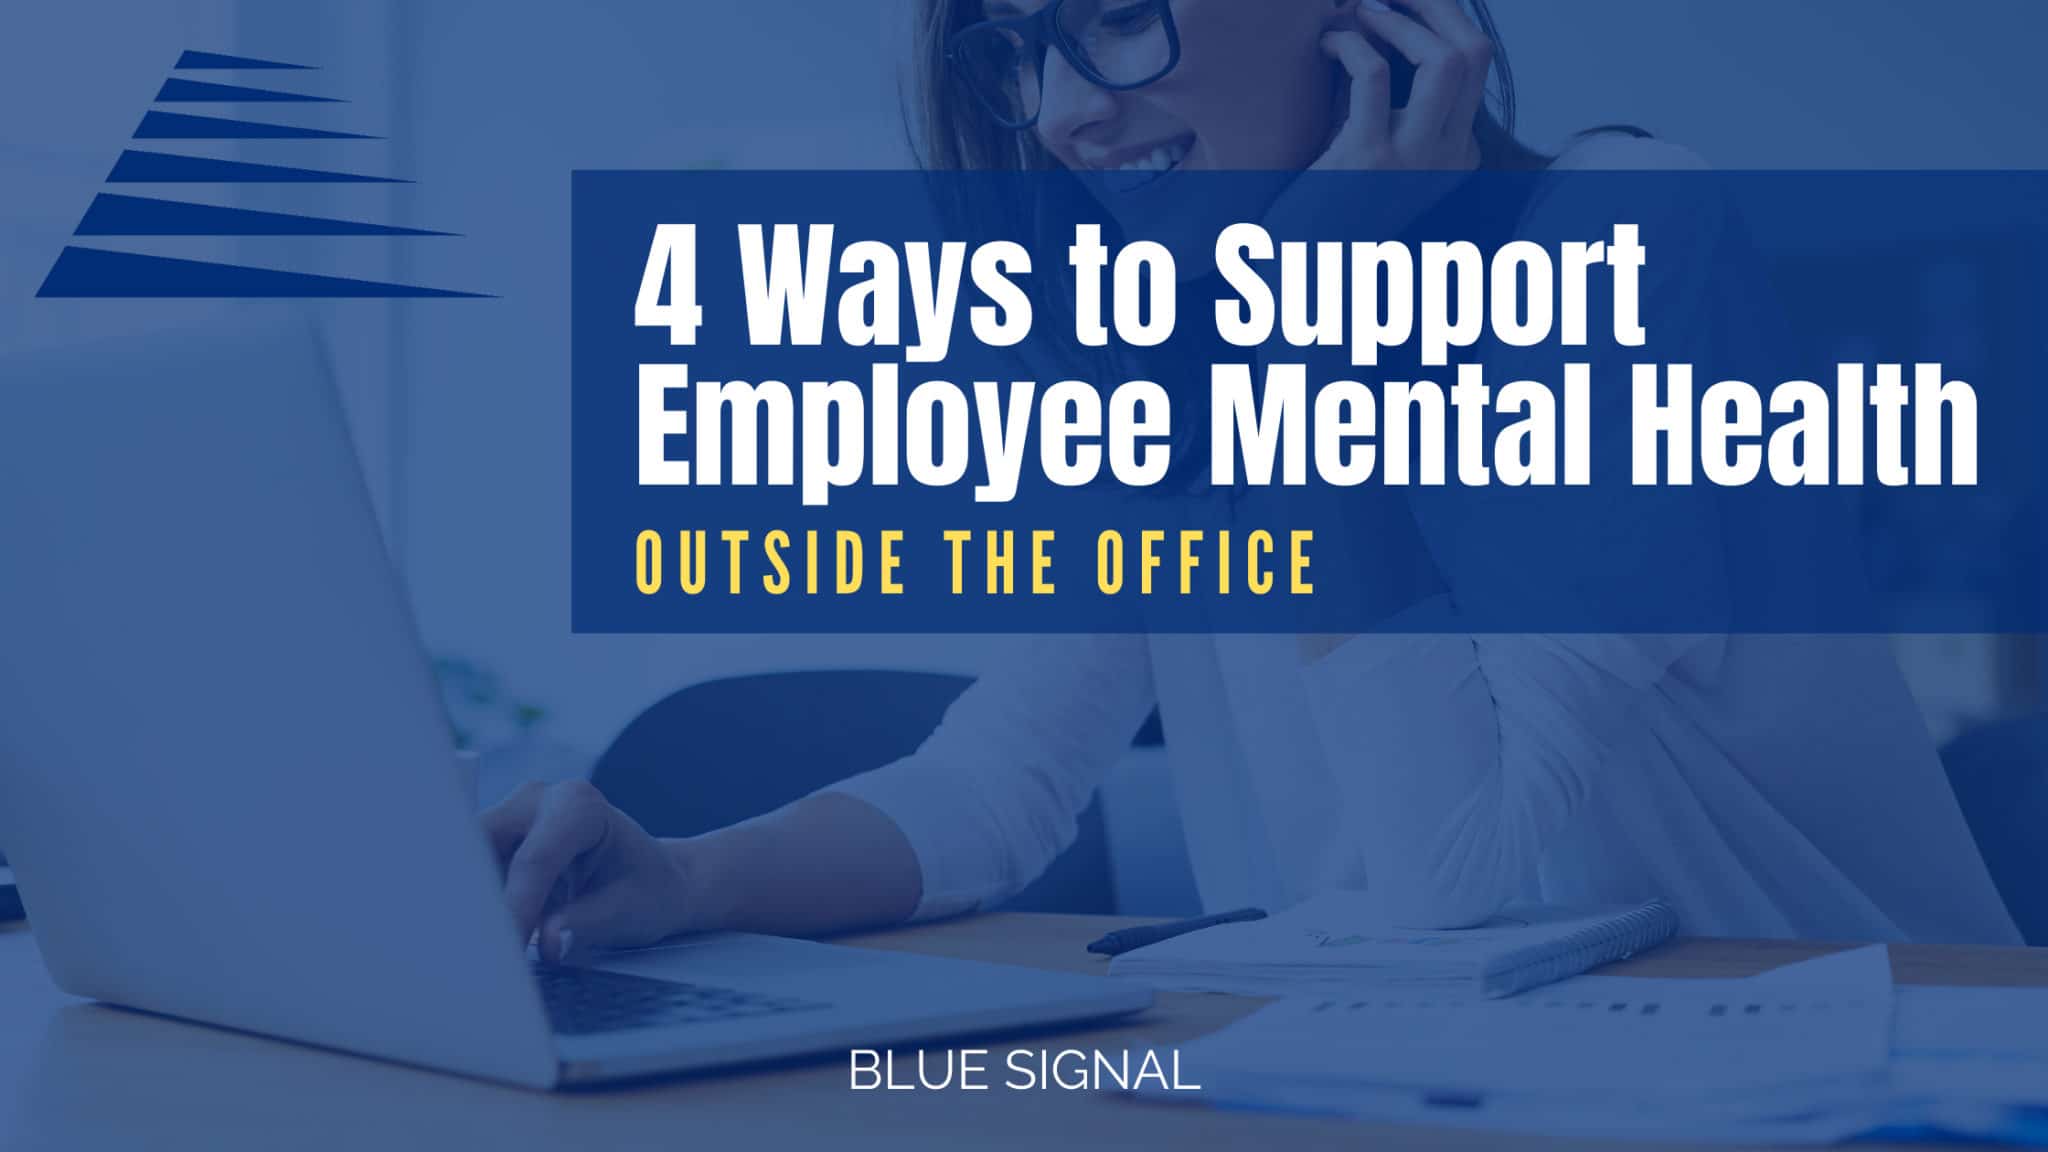 4 Ways to Support Employee Mental Health Outside the Office